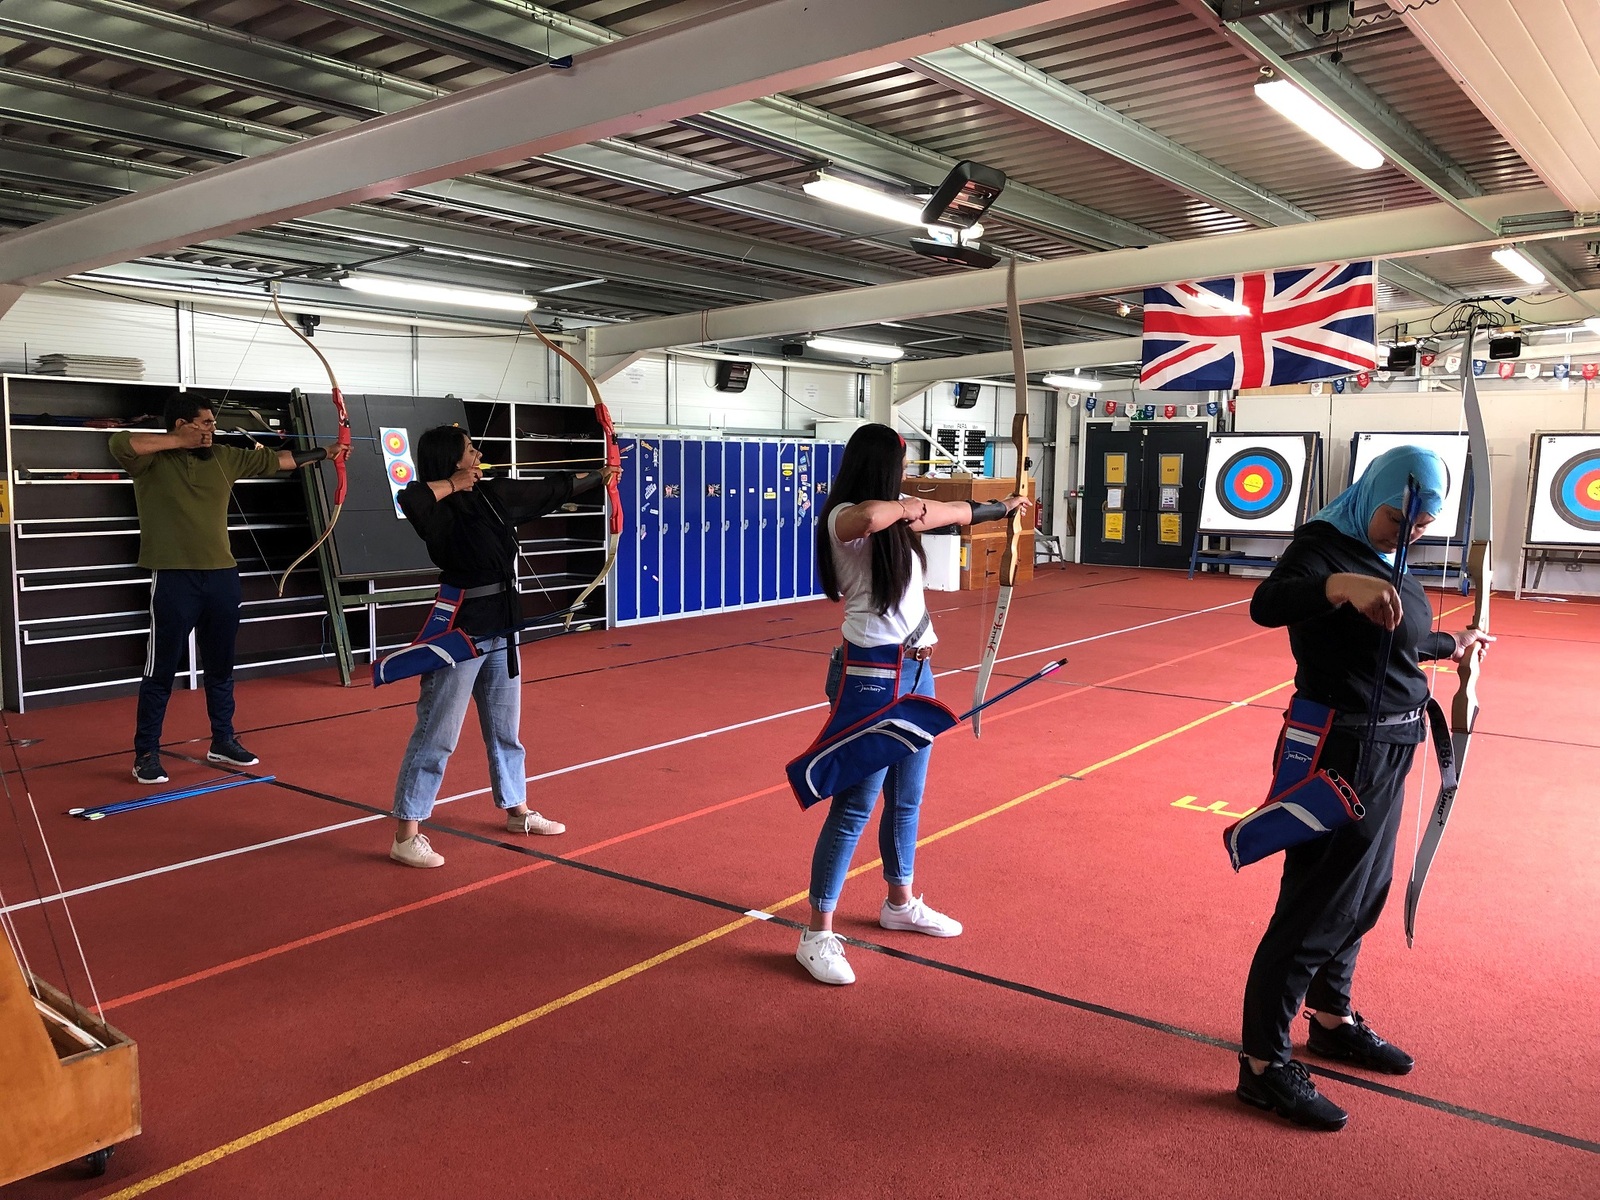 Members of the Muslim Sports Foundation try out archery at Archery GB headquarters in Lilleshall